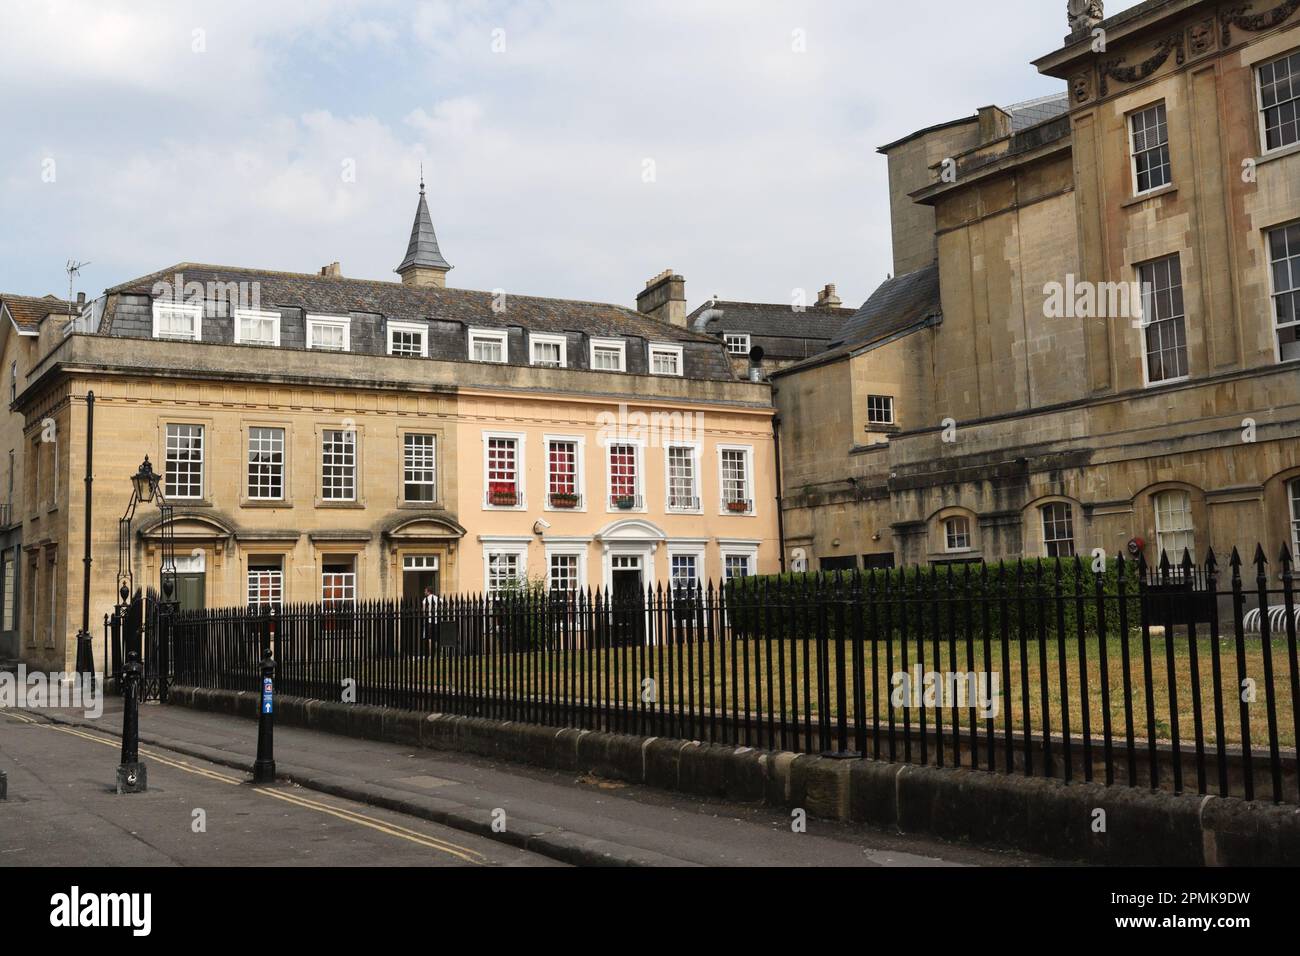 Buildings on Beauford Square, Bath city centre England Stock Photo